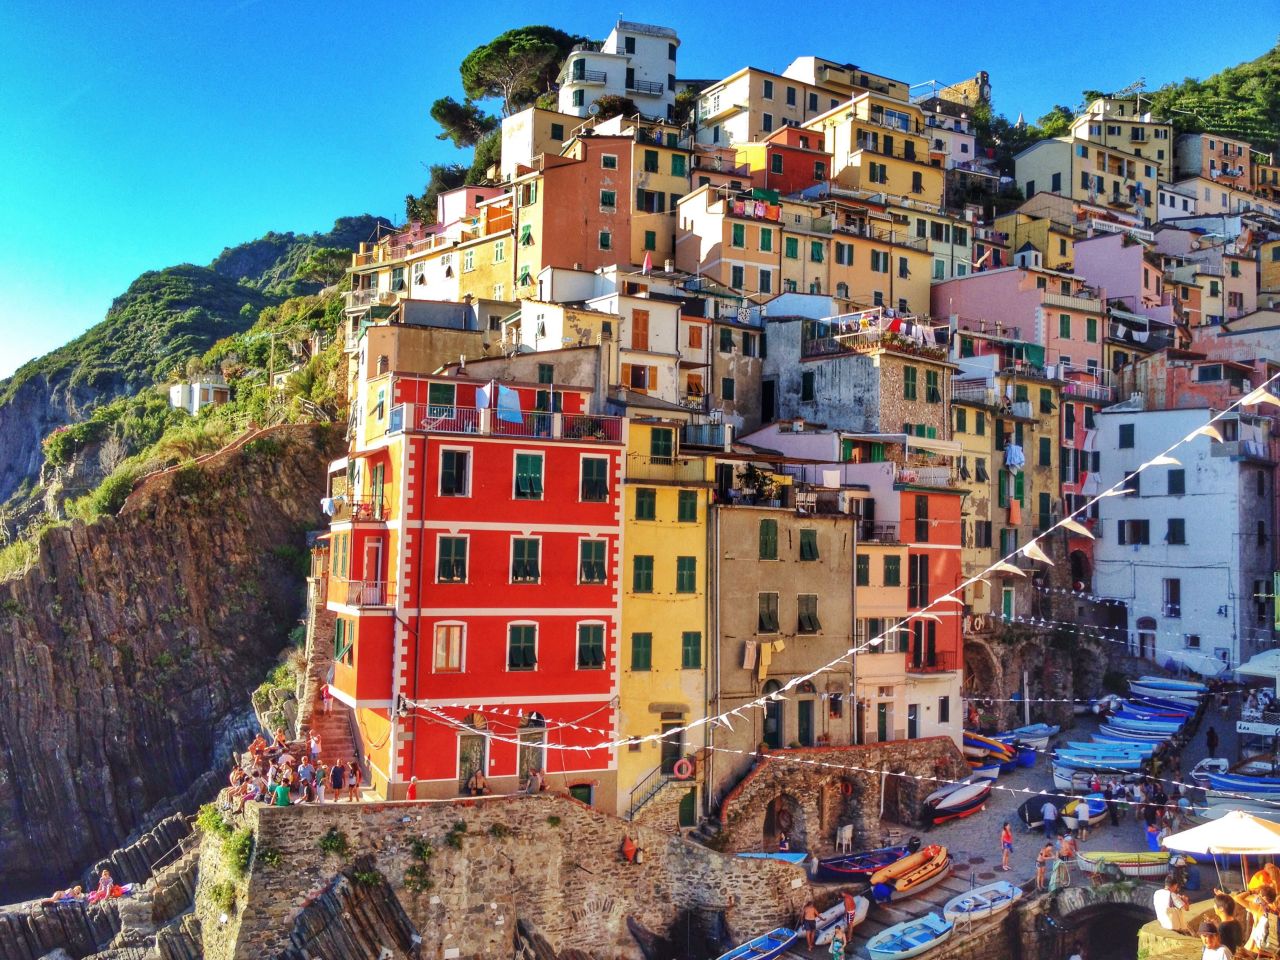 Cinque Terre is a series of colorful fishing villages on the Italian Riviera.